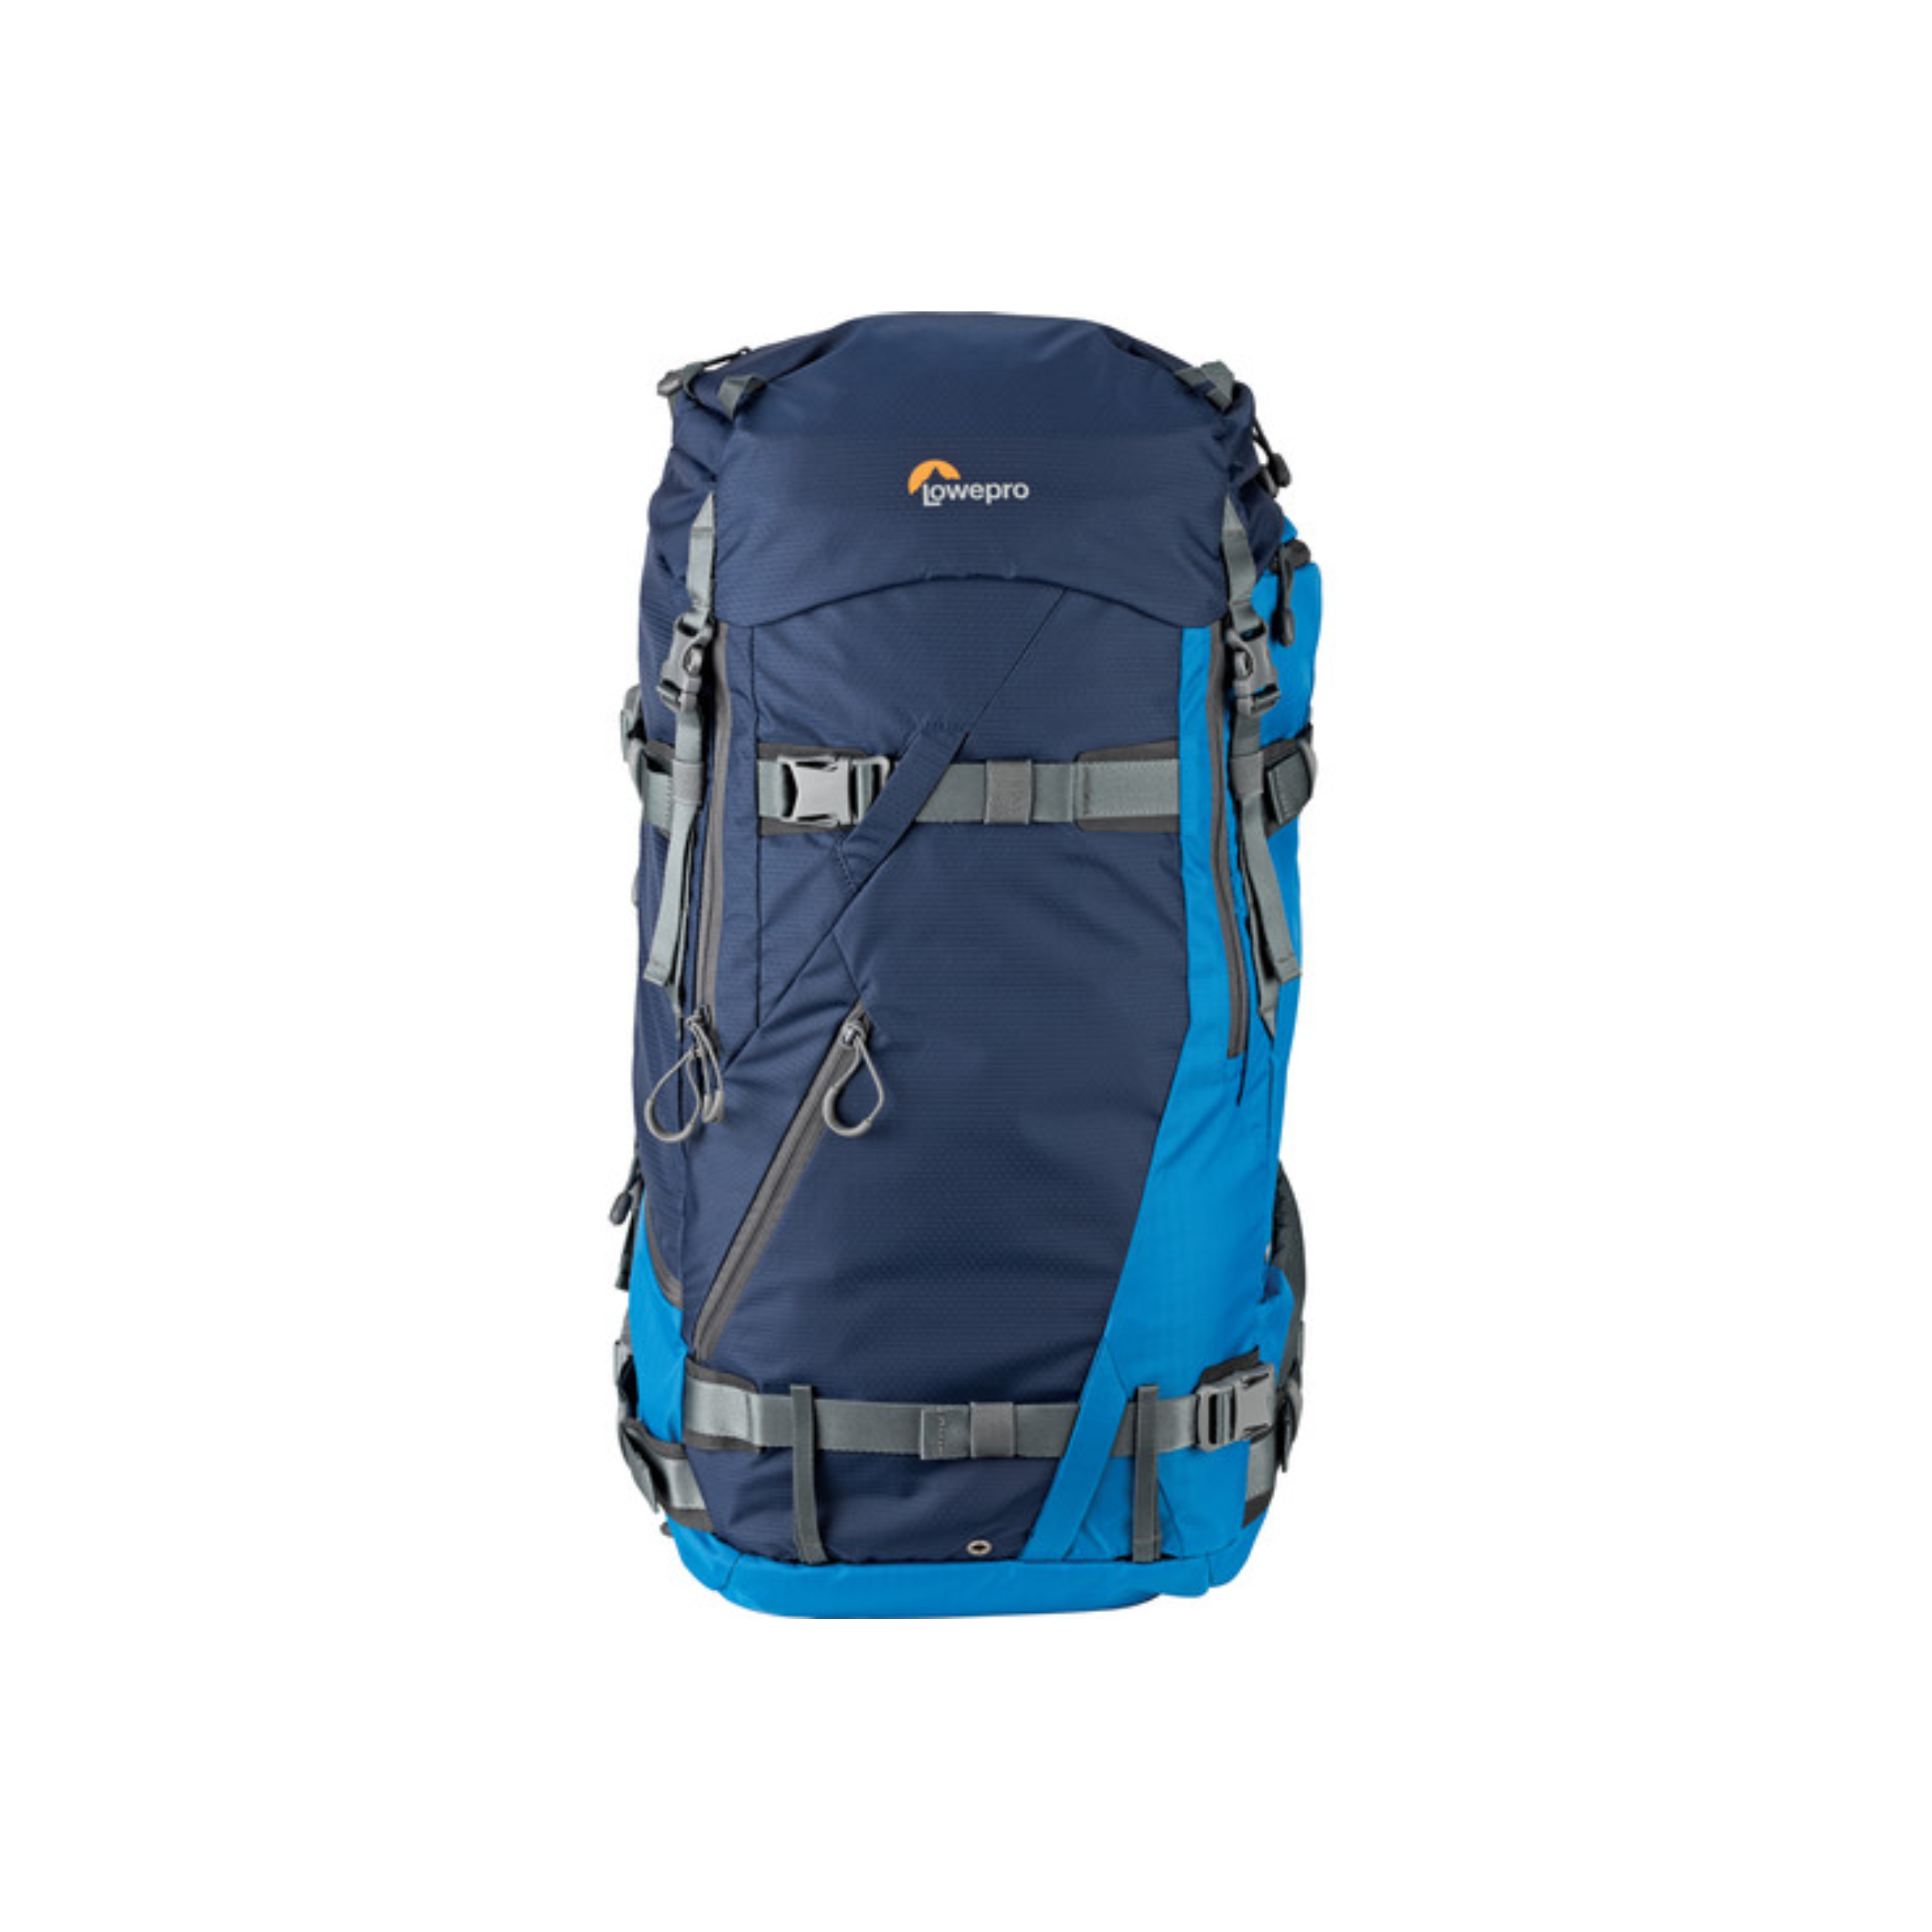 Lowepro LP37231 Powder Backpack 500 AW - Midnight and Horizon Blue)